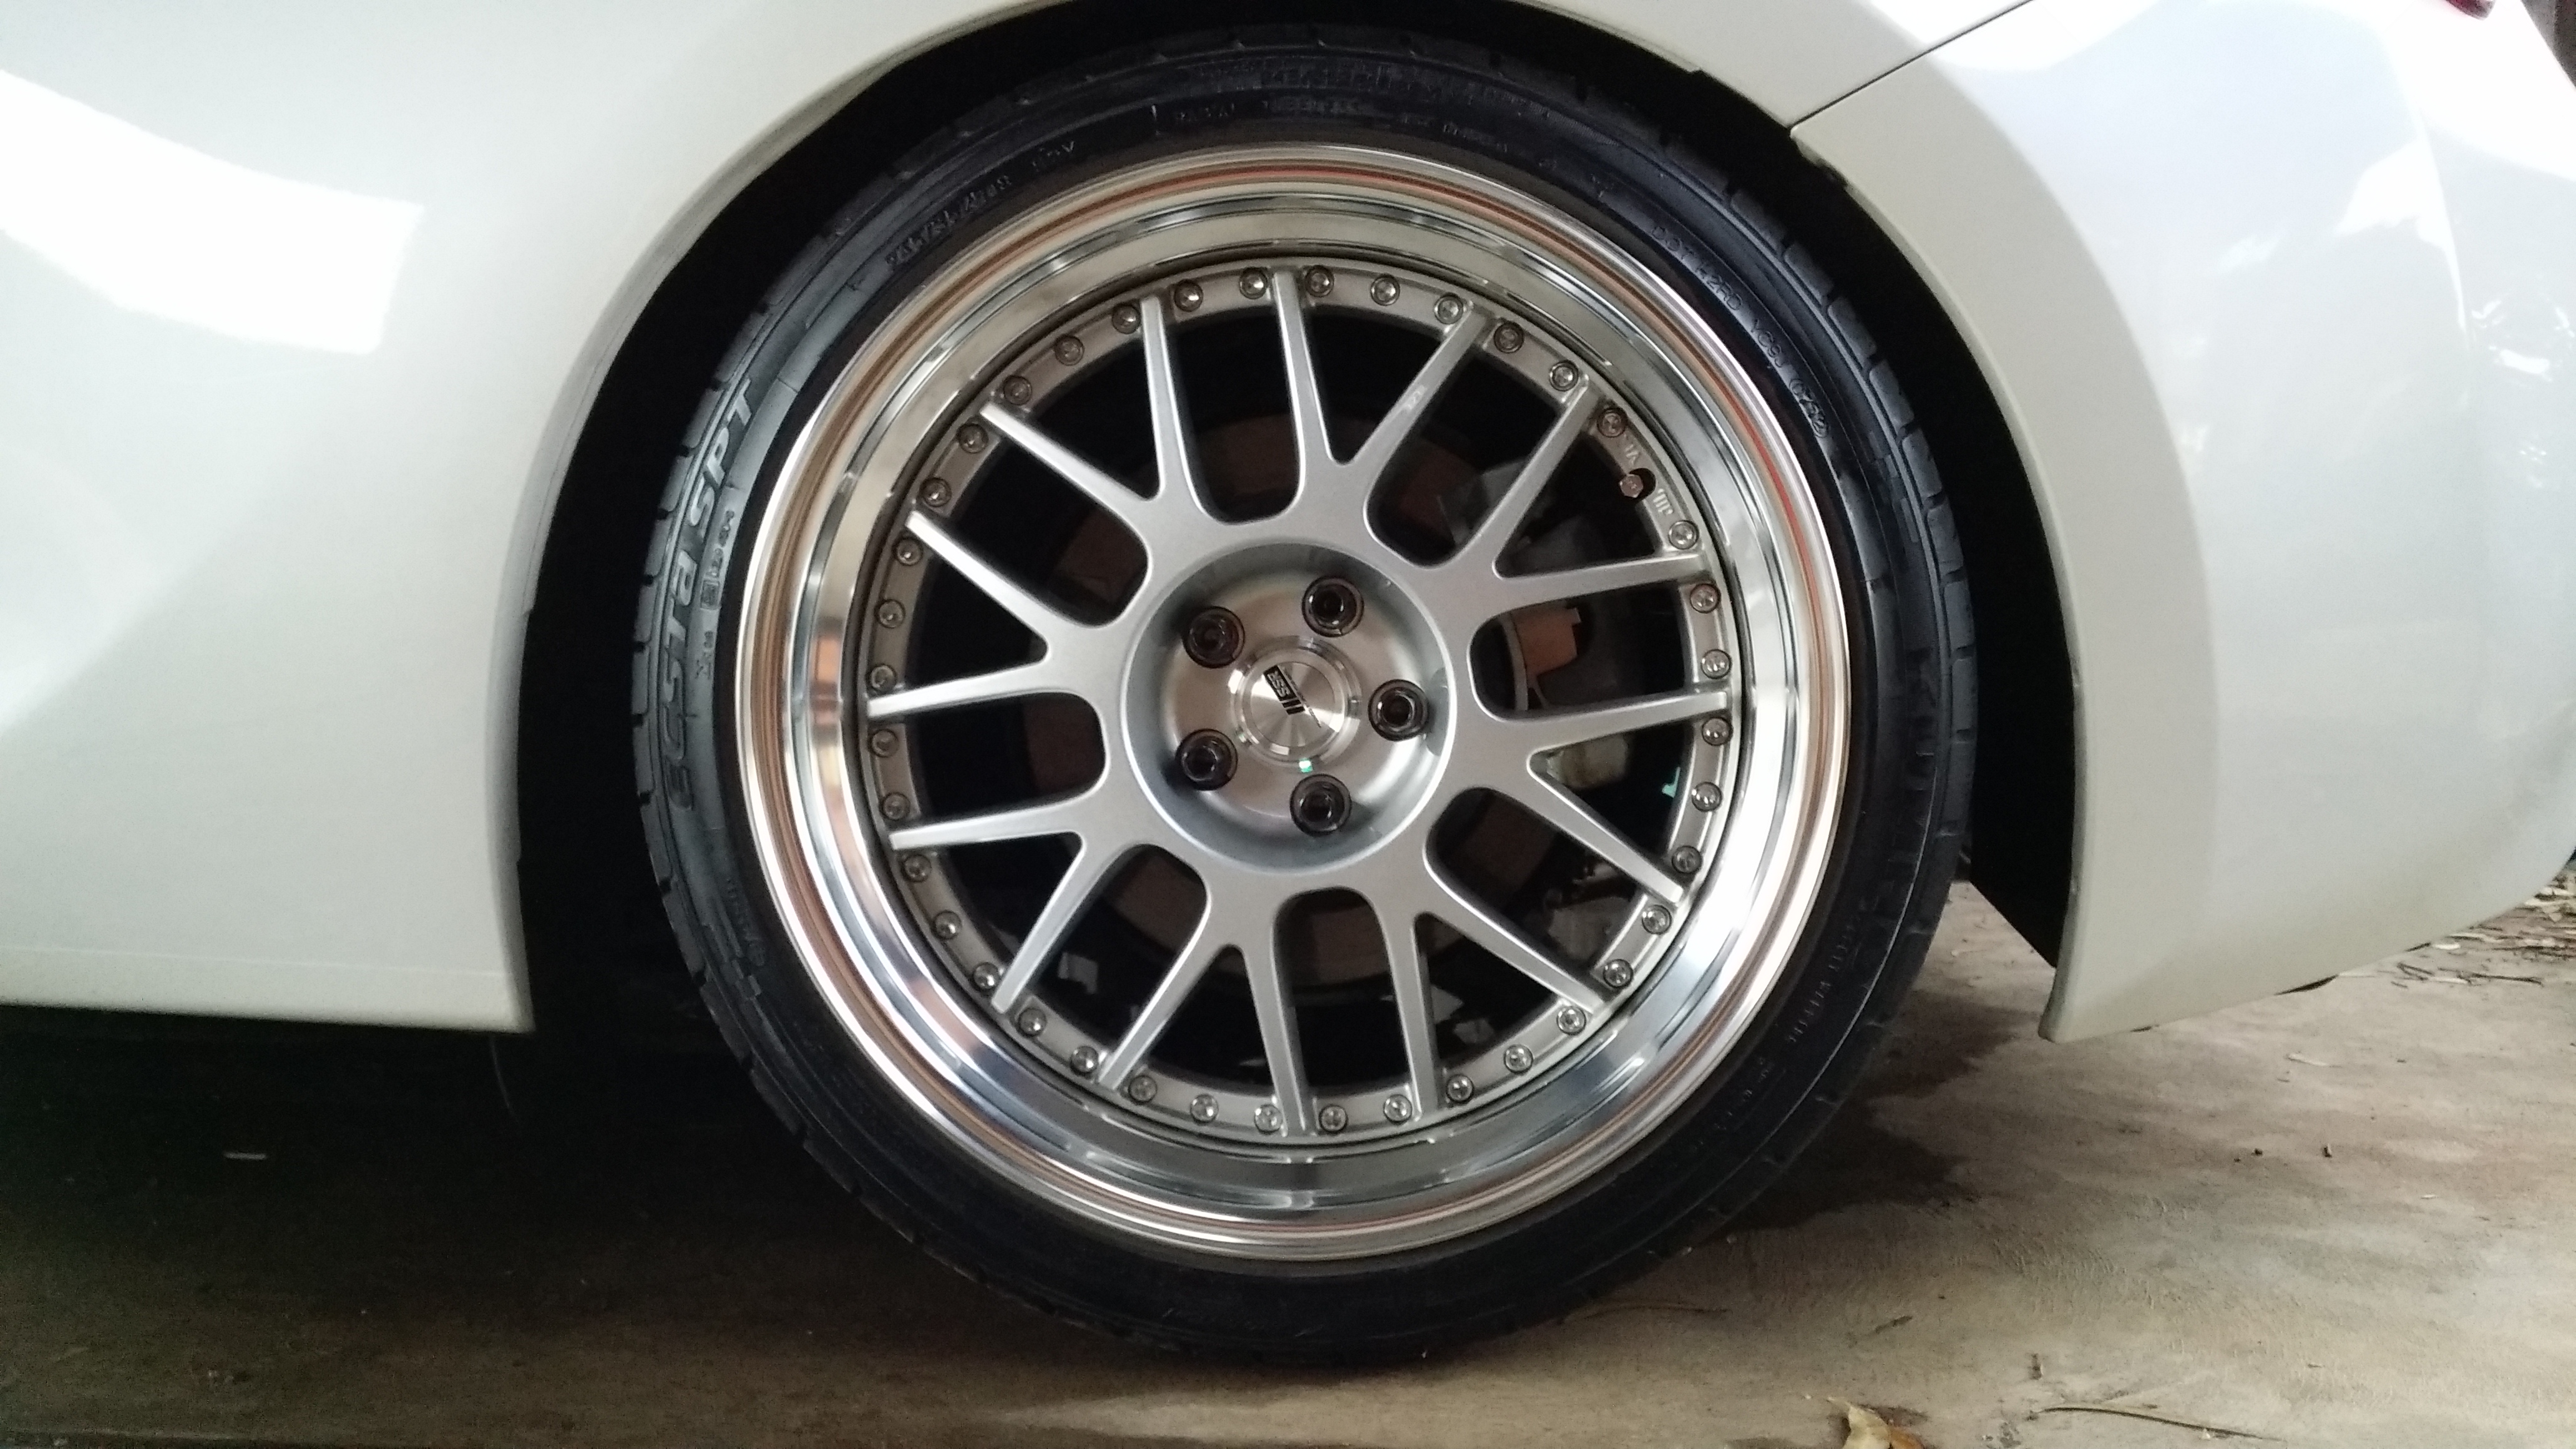 SSR Professor MS1 3 Piece Wheels and Brand New Kumho KU39 Tyres Suits 